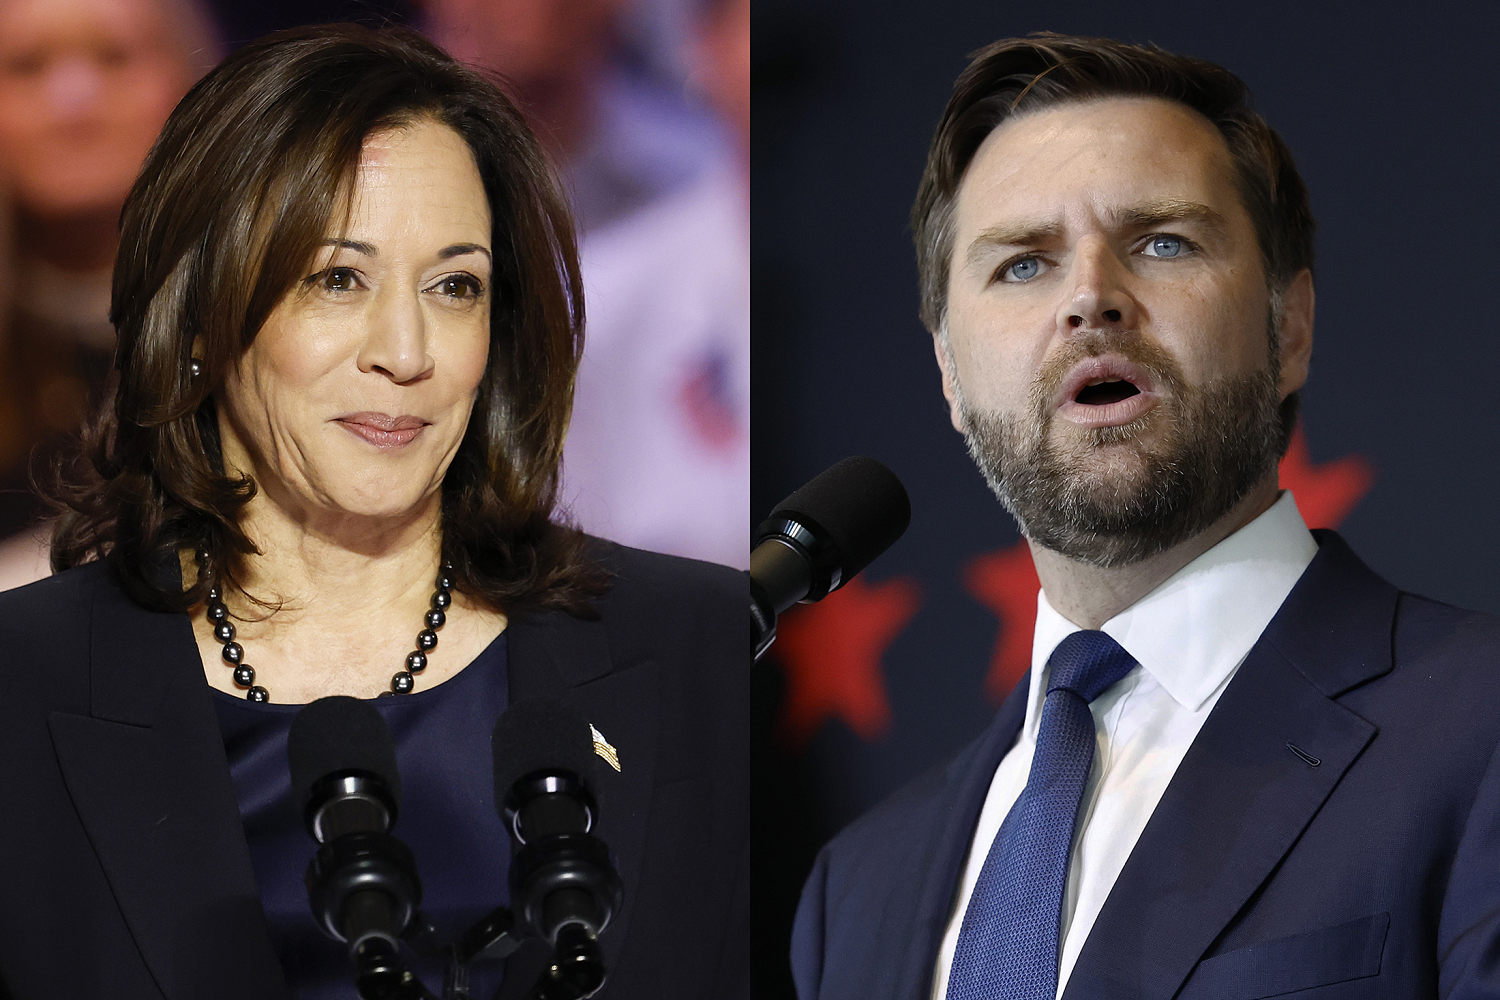 JD Vance defends Trump’s attack on Harris’ biracial identity as ‘totally reasonable’